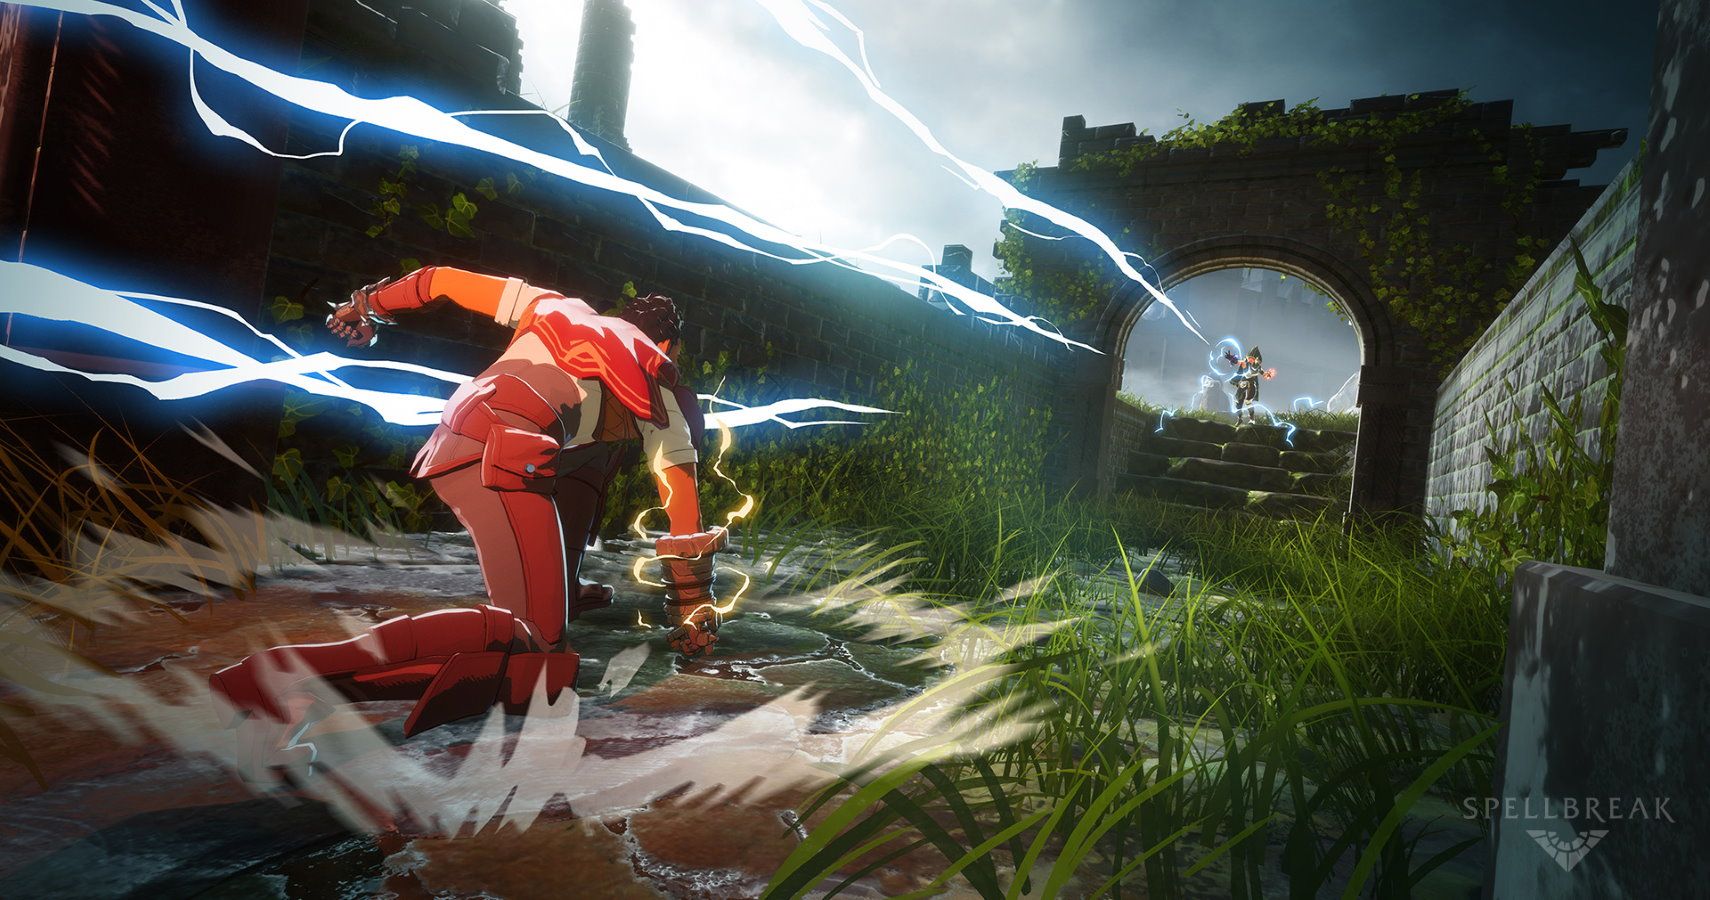 Spellbreak Developers Pull In $20 Million Investment (Led By Take-Two)